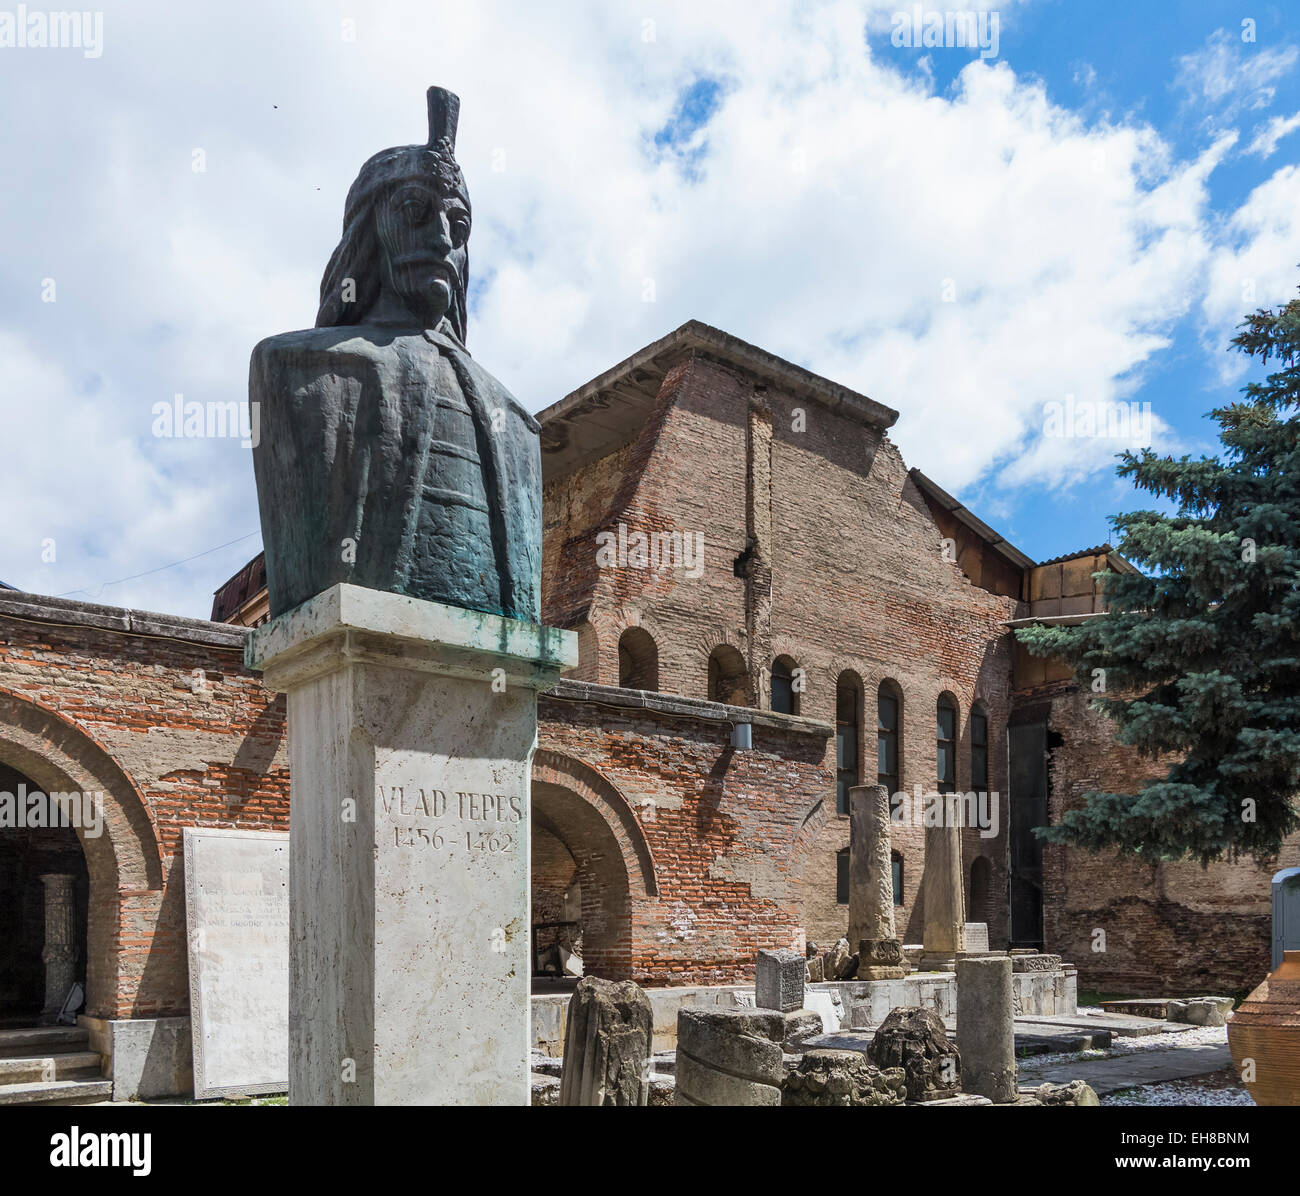 Statue at the house of Vlad the Impaler, Bucharest, Romania, Europe Stock Photo